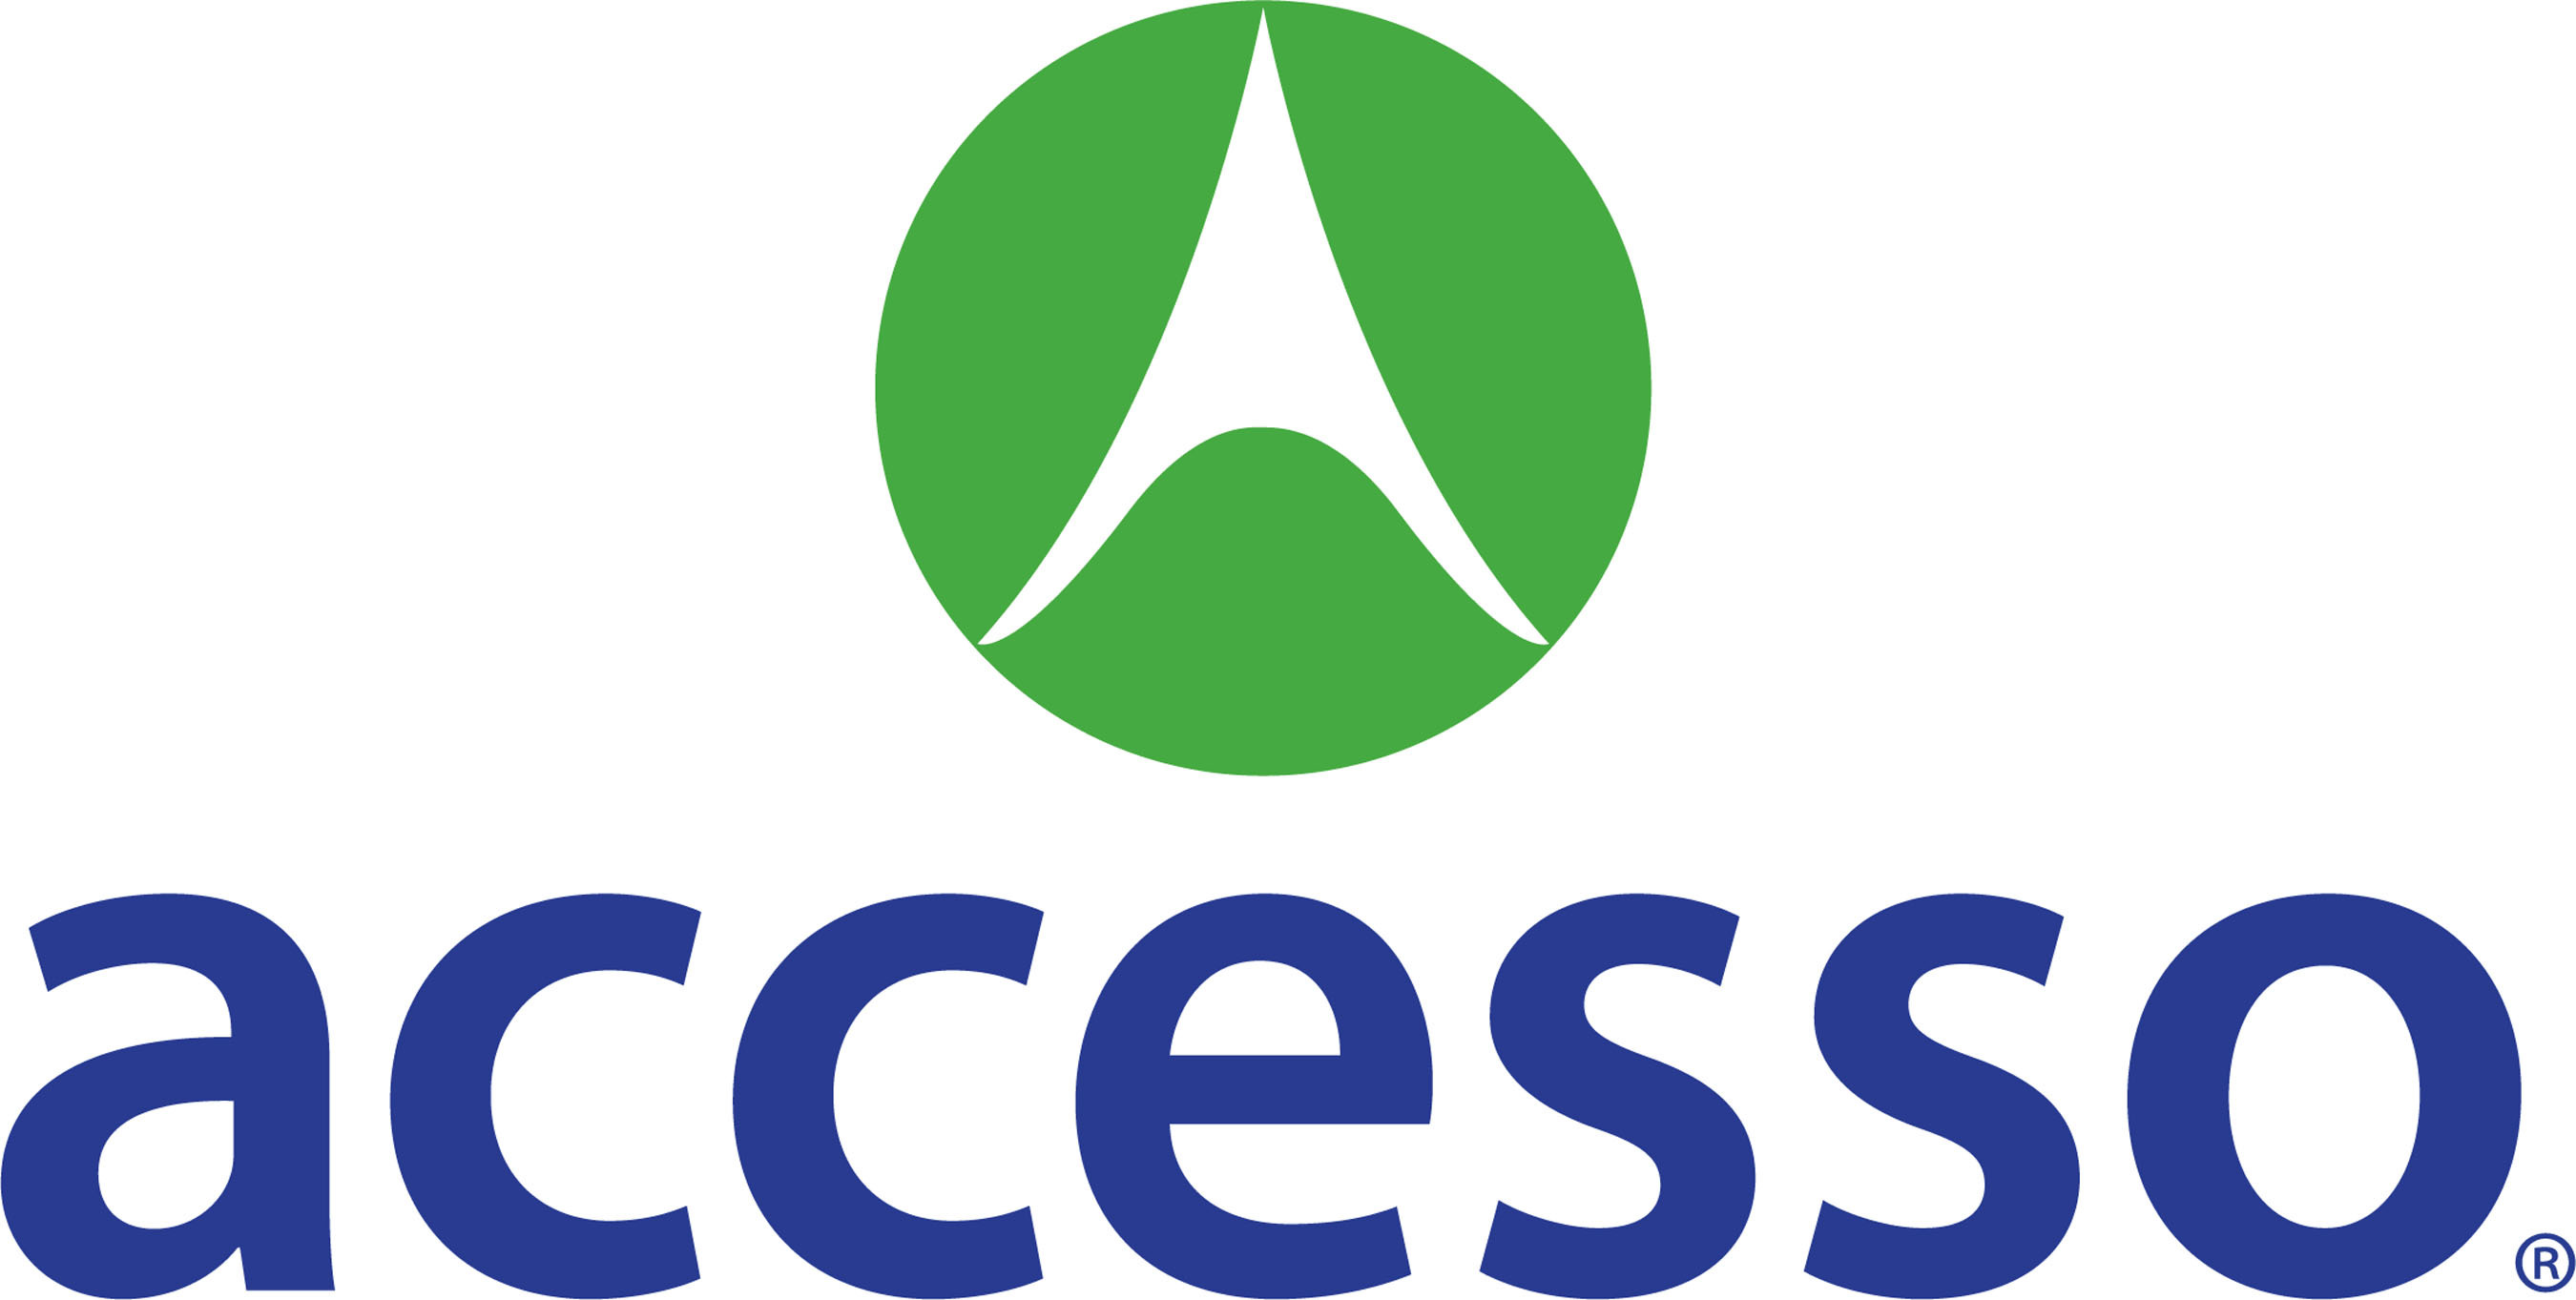 accesso (AIM: ACSO) is the premier technology solutions provider to the global attractions and leisure industry